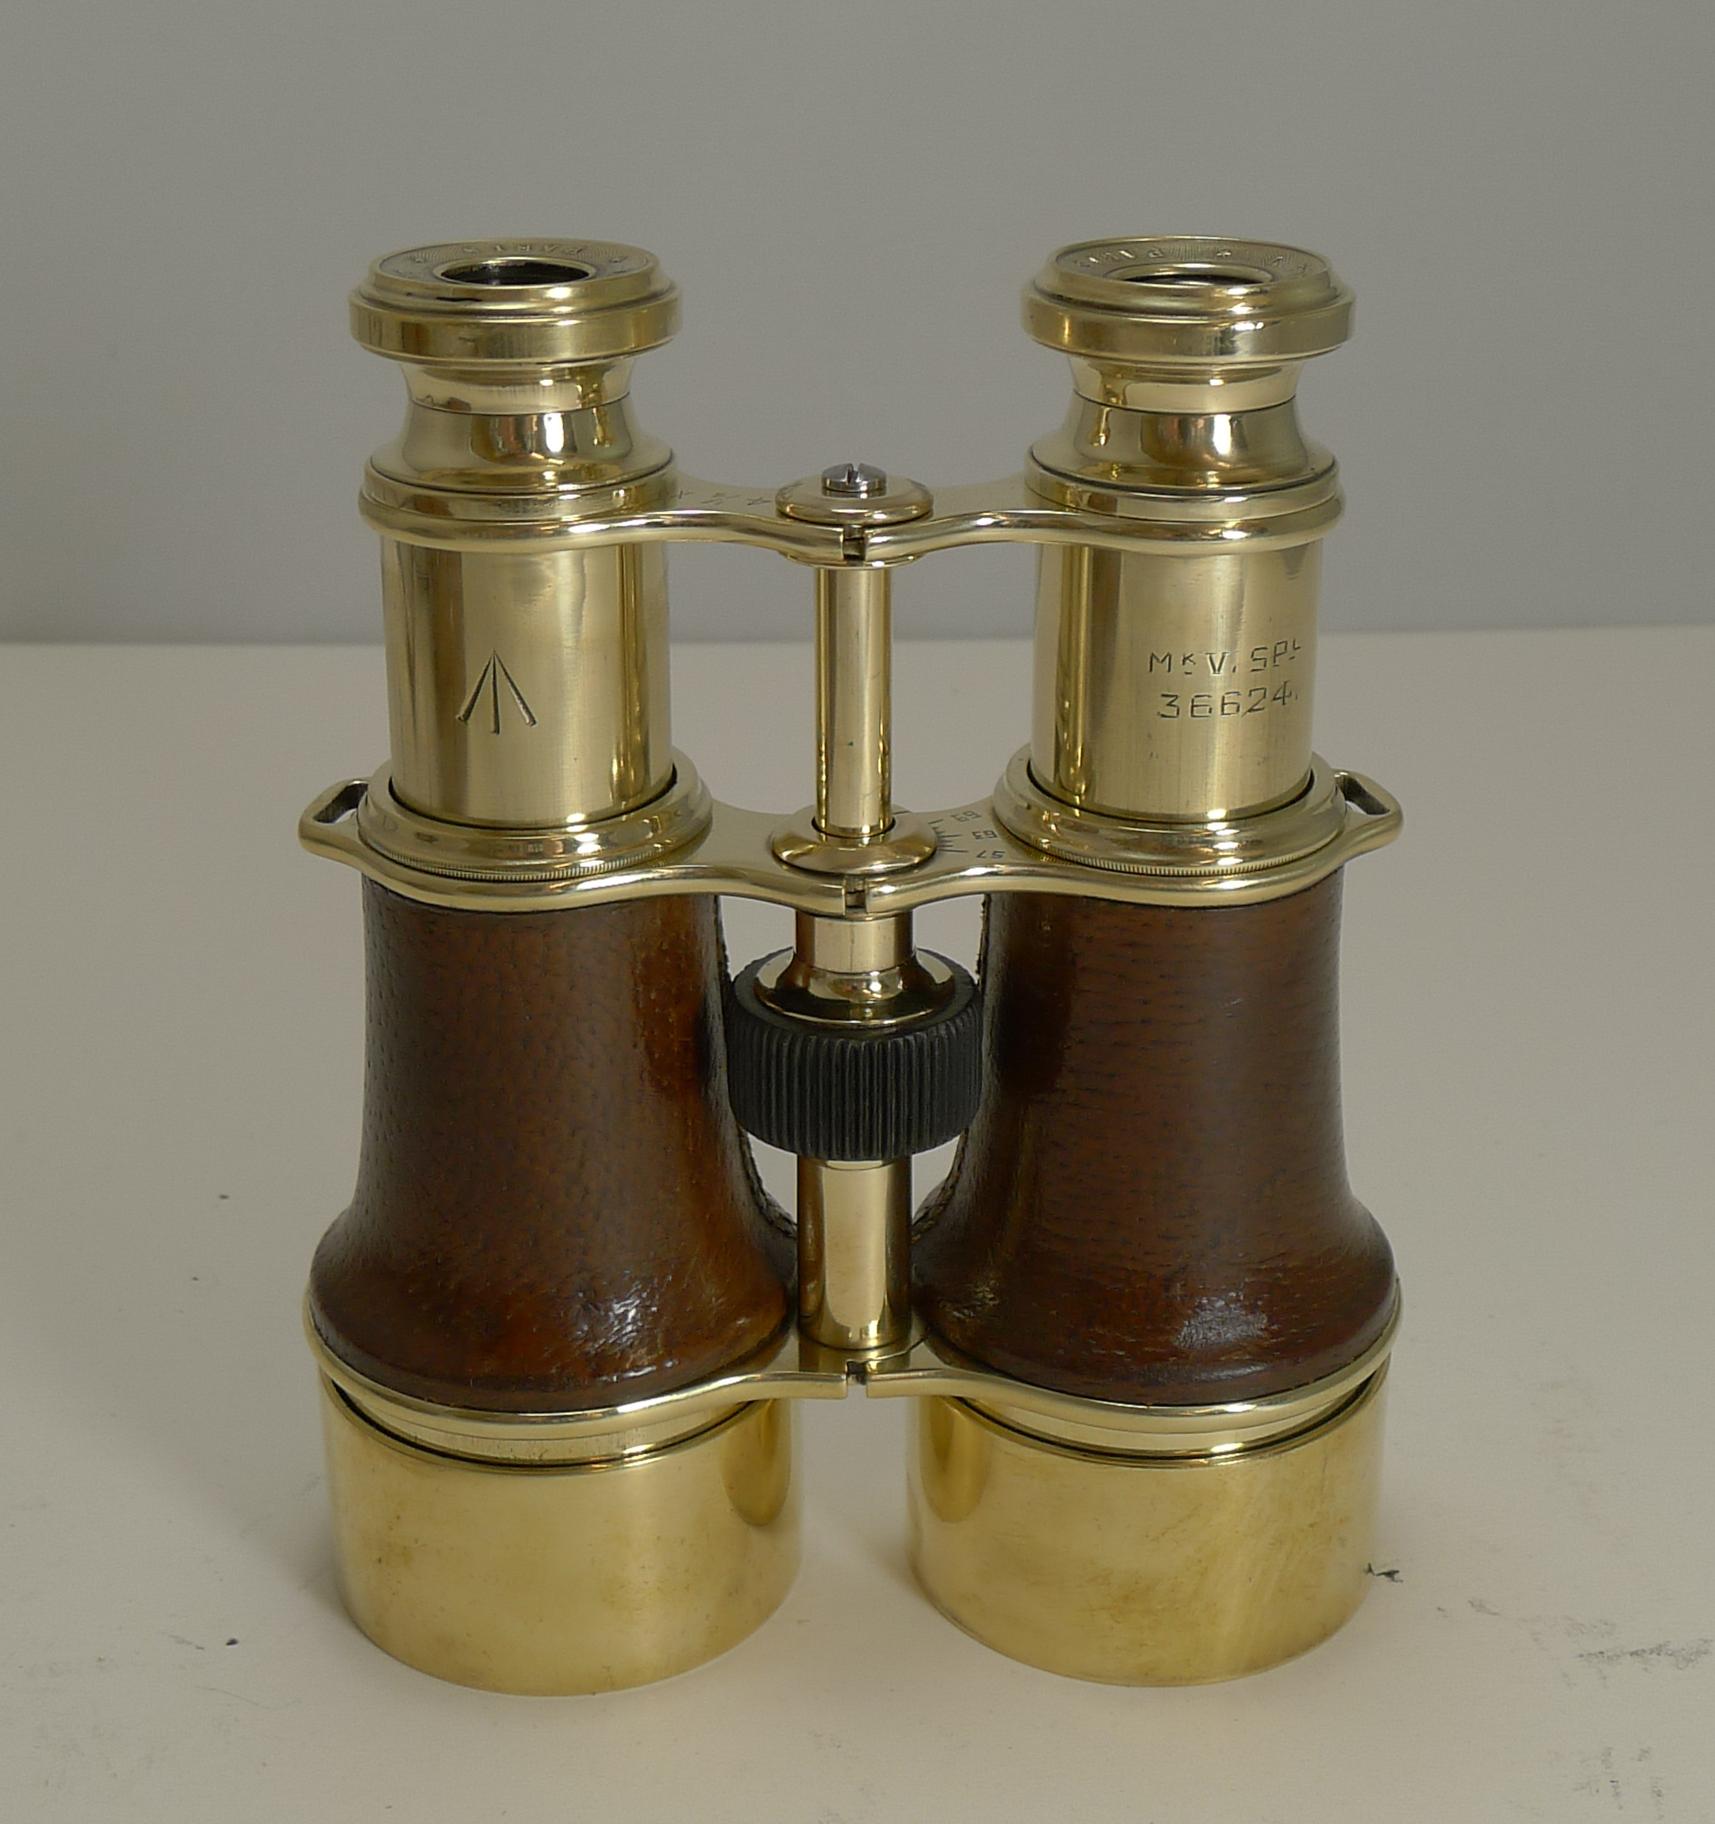 A stunning pair of French made binoculars or field glasses dating to circa 1917. Made from polished brass, they have been meticulously re-polished to gleam, which looks stunning paired with the cognac colored leather.

They focus wonderfully and